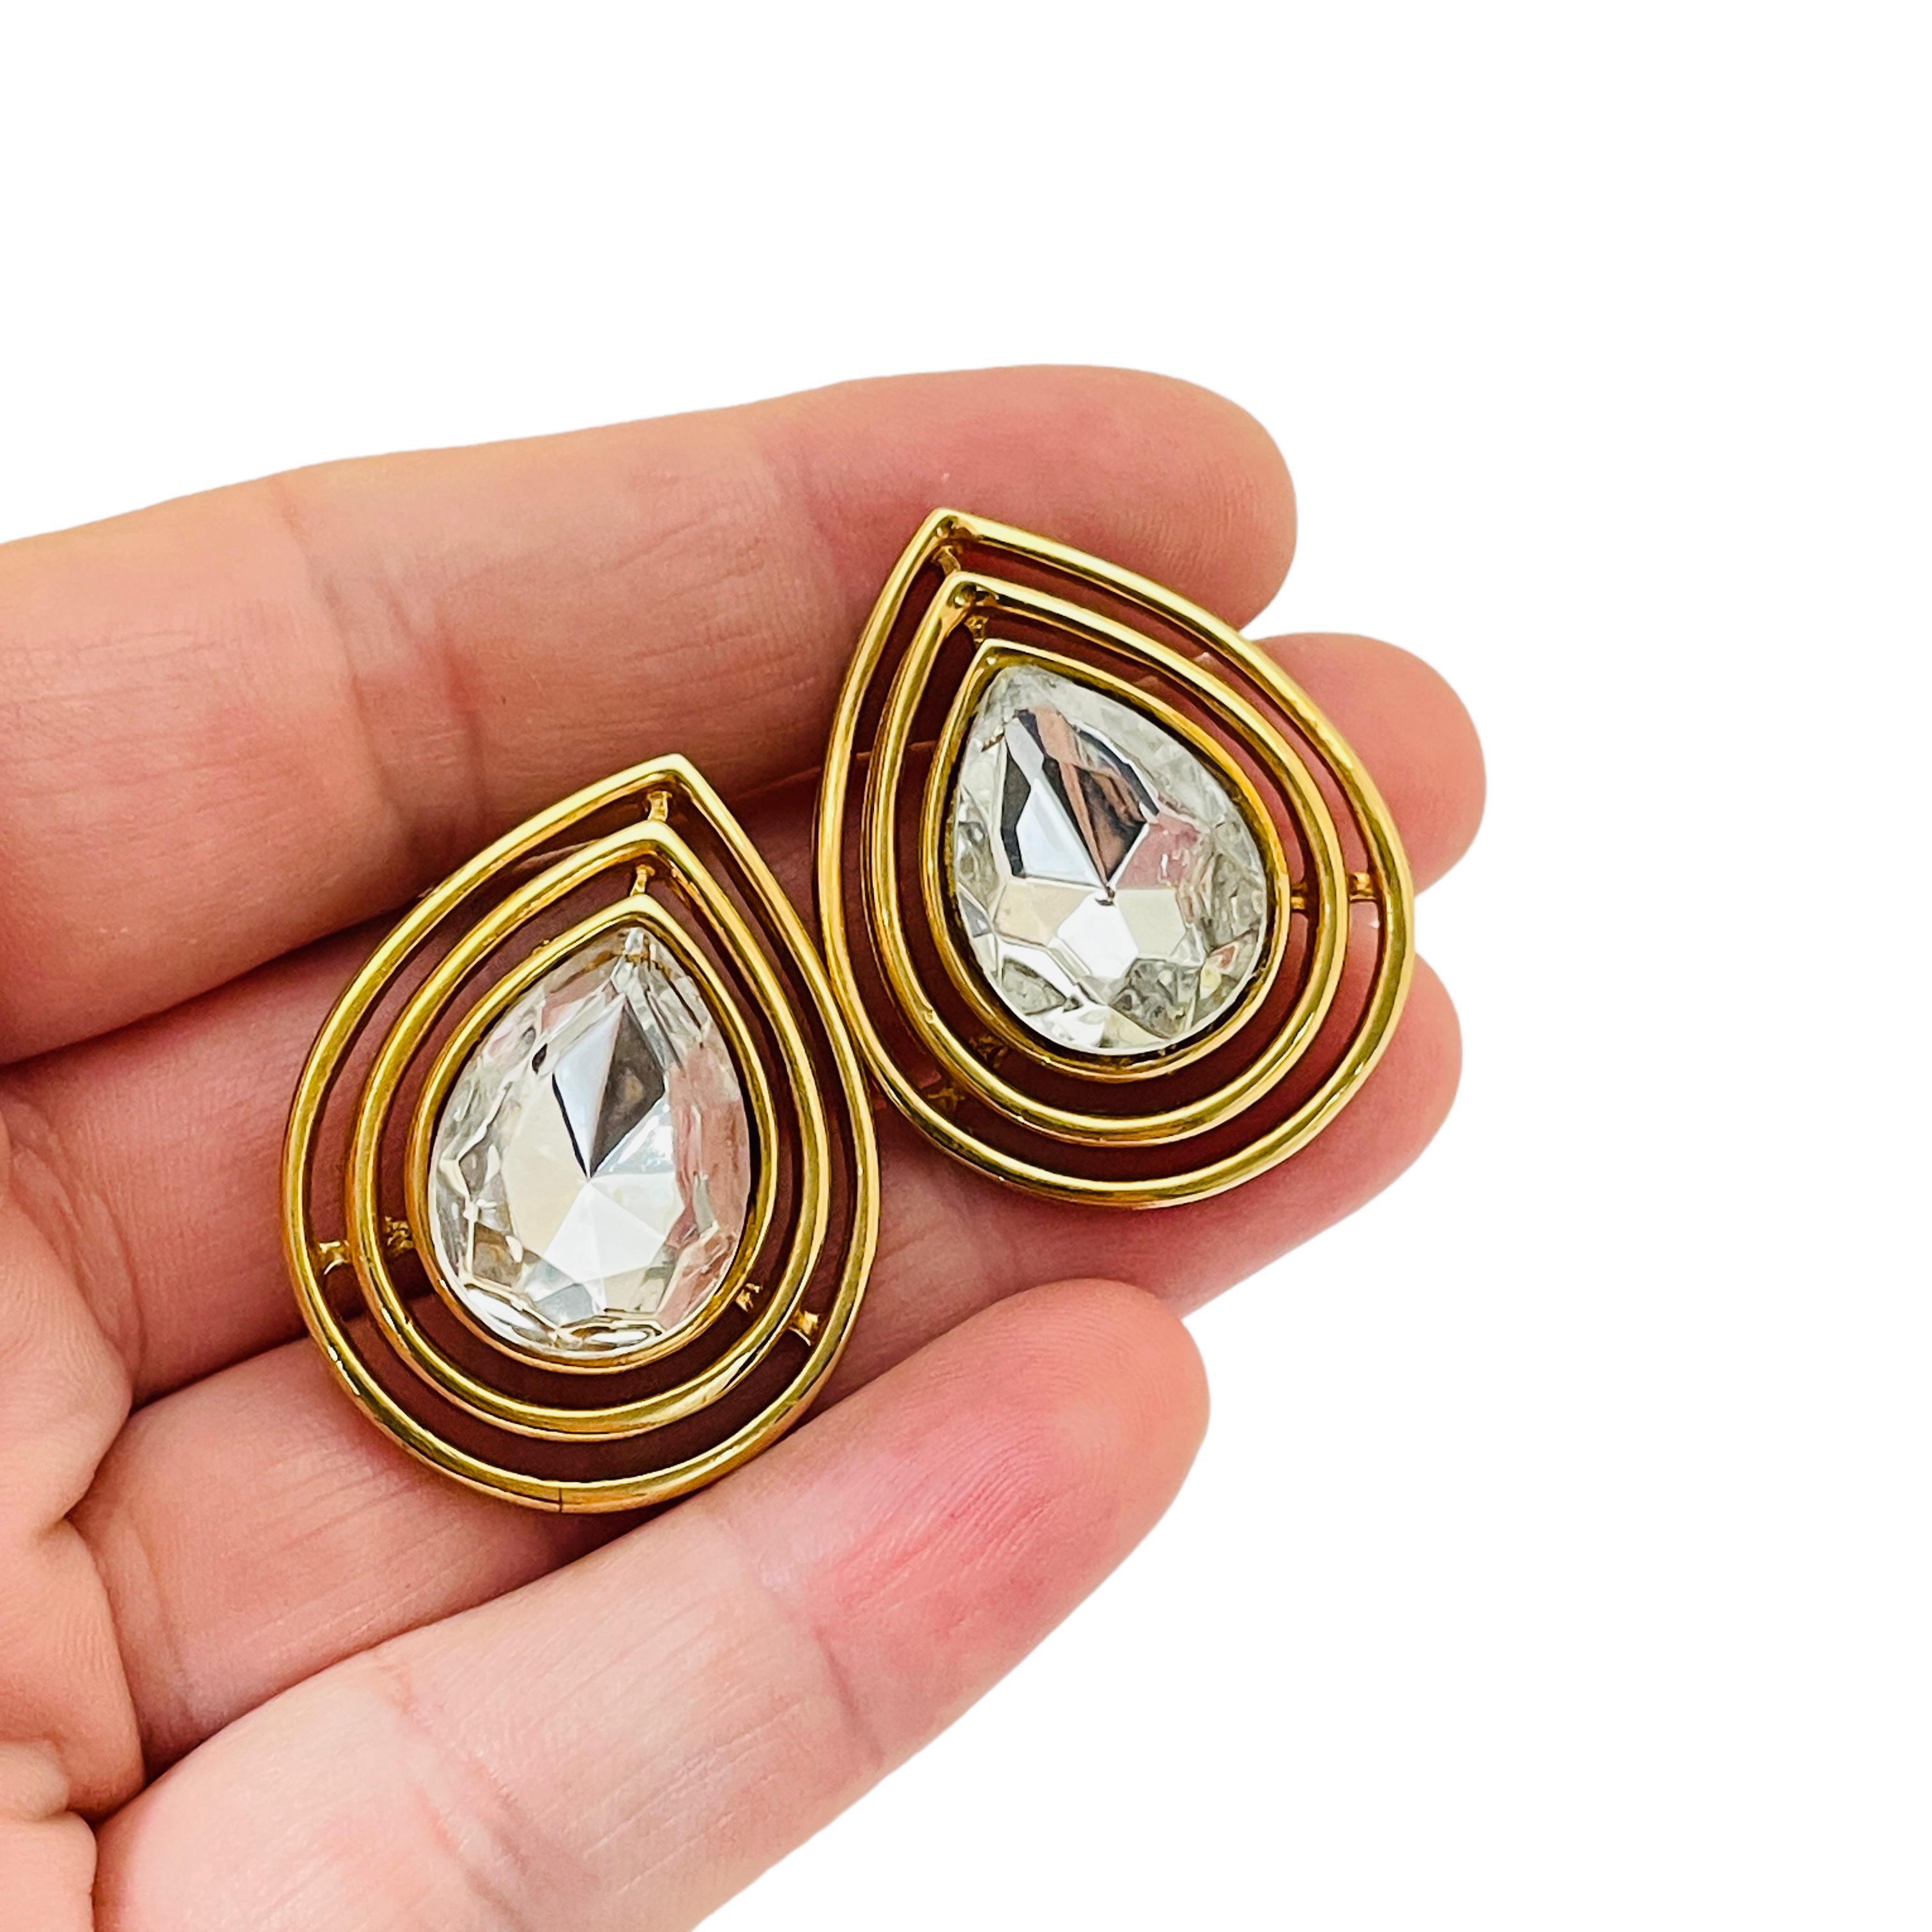 DETAILS

• signed TRIFARI

• gold tone with glass

• vintage designer clip on earrings

MEASUREMENTS

• 1.25